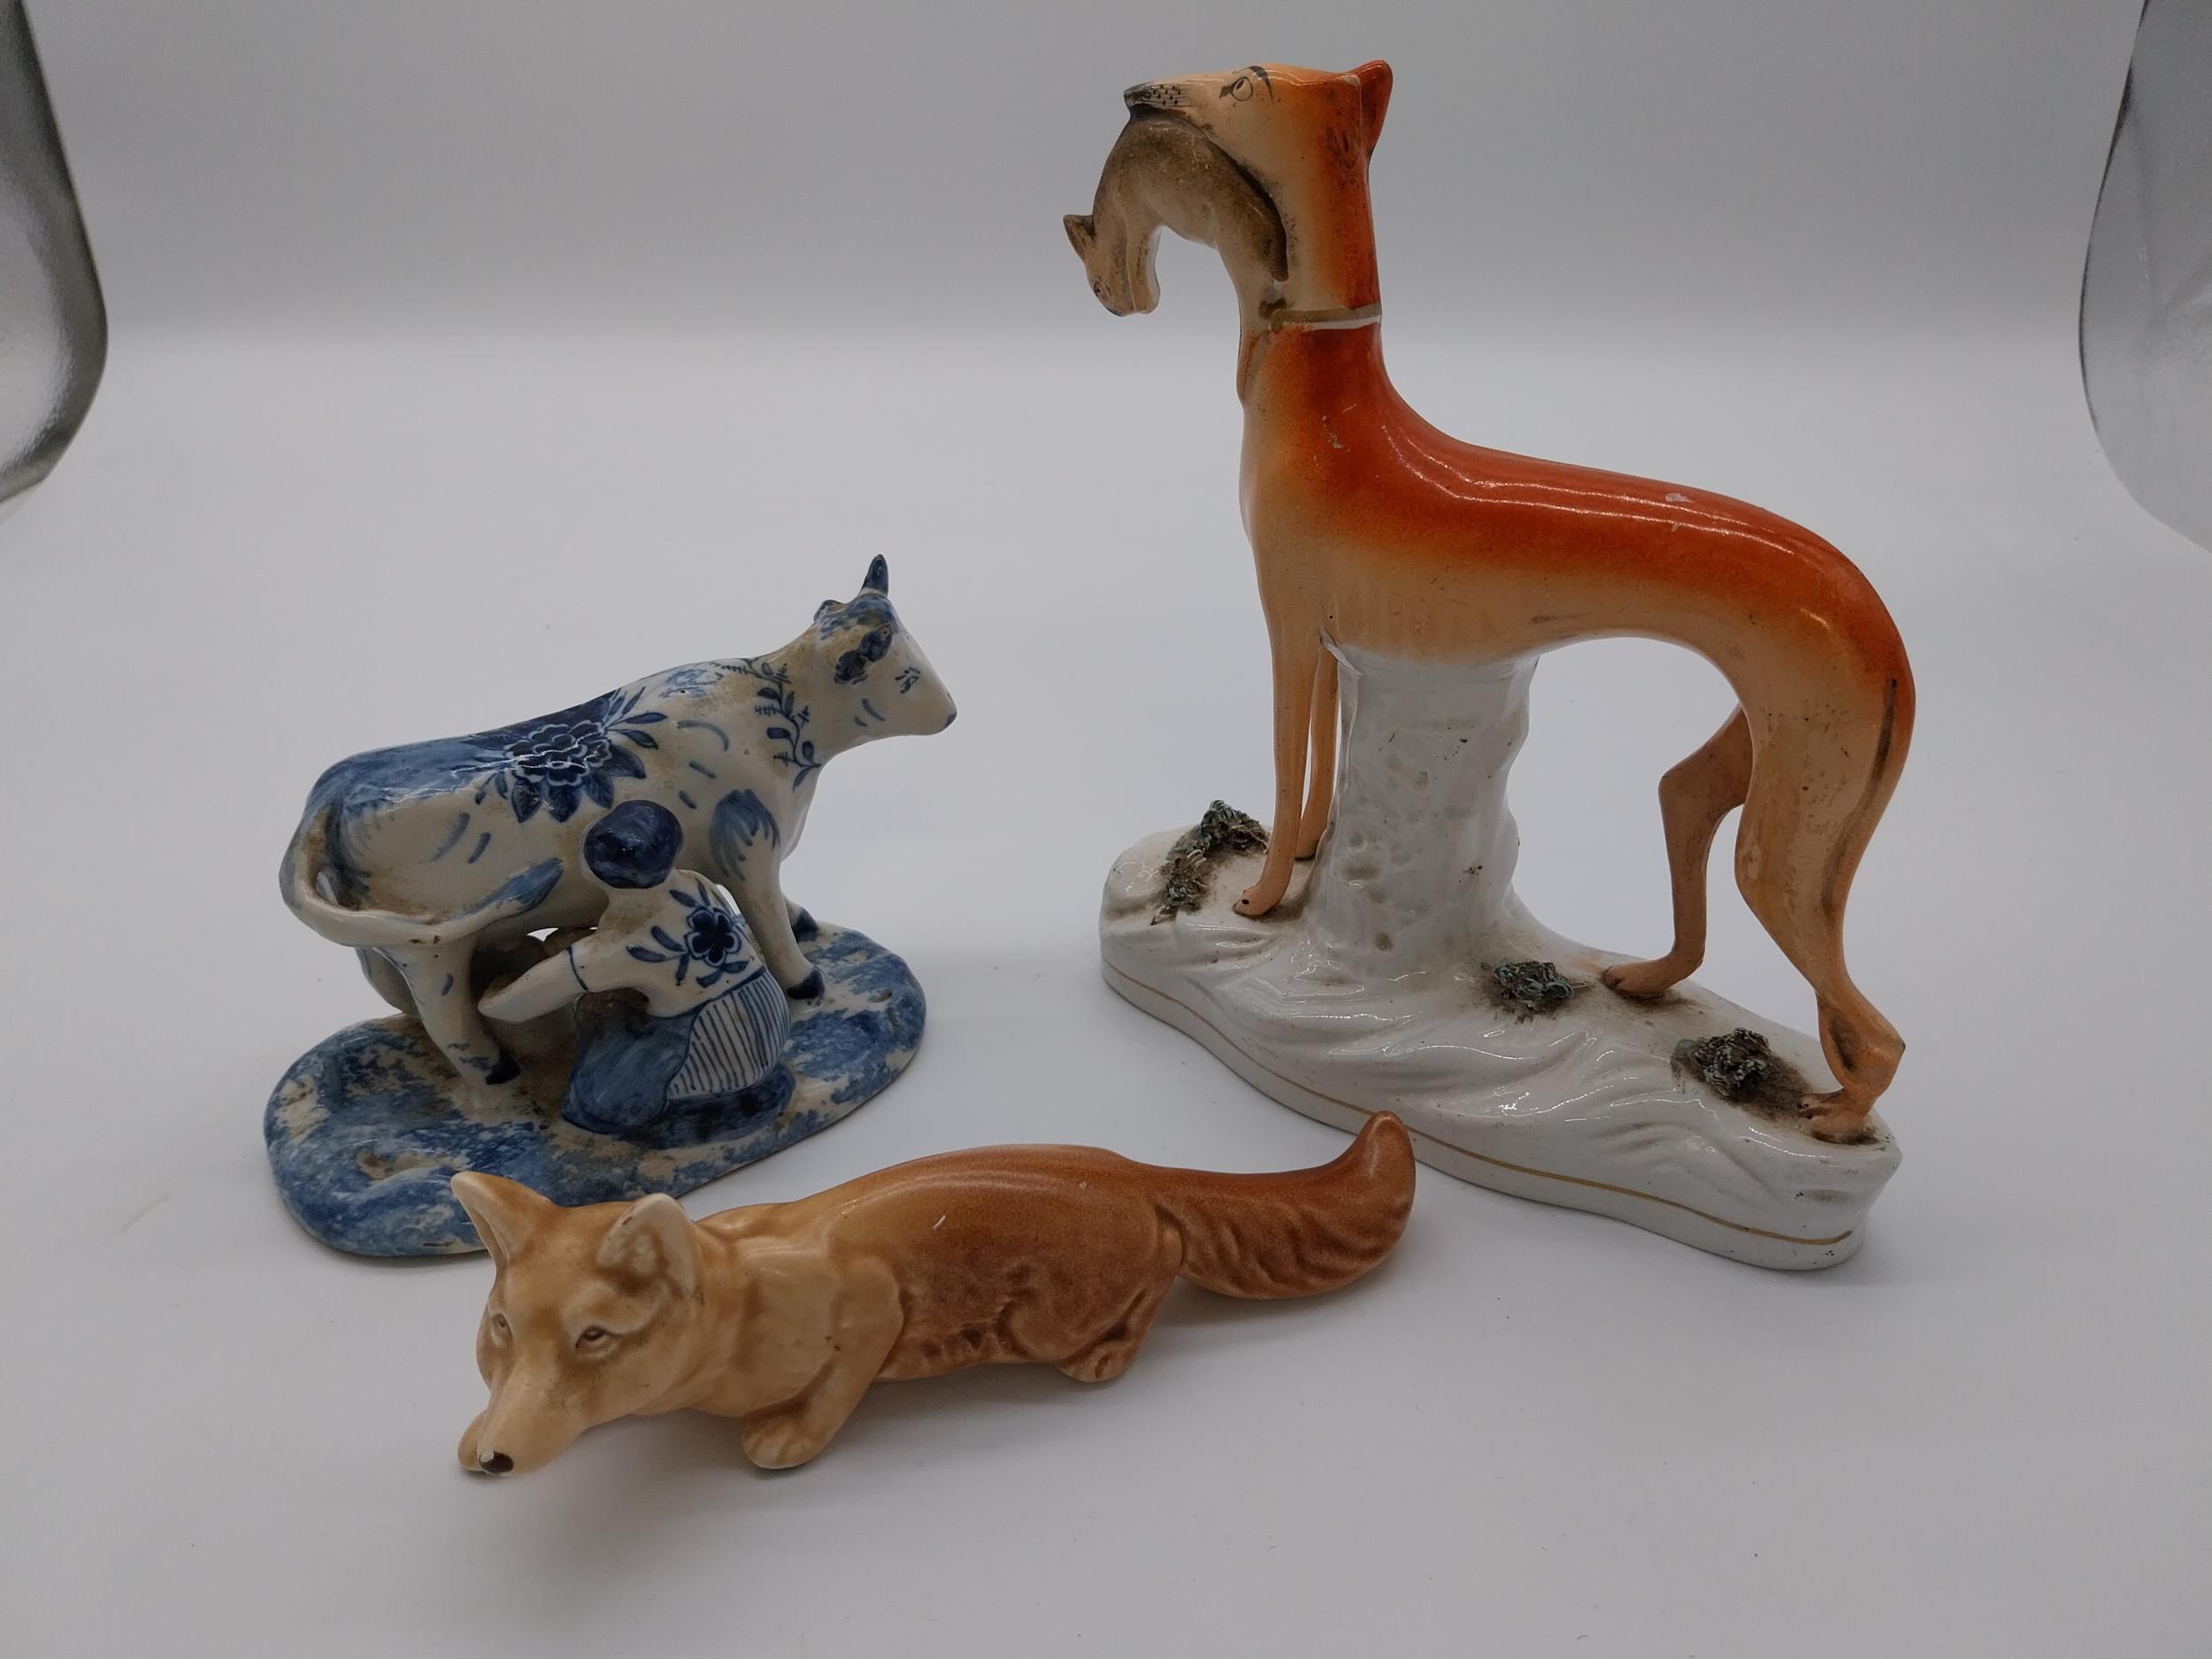 Staffordshire figure of Greyhound {20 cm H x 18 cm W}, Dutch blue and white cow and milk maid and